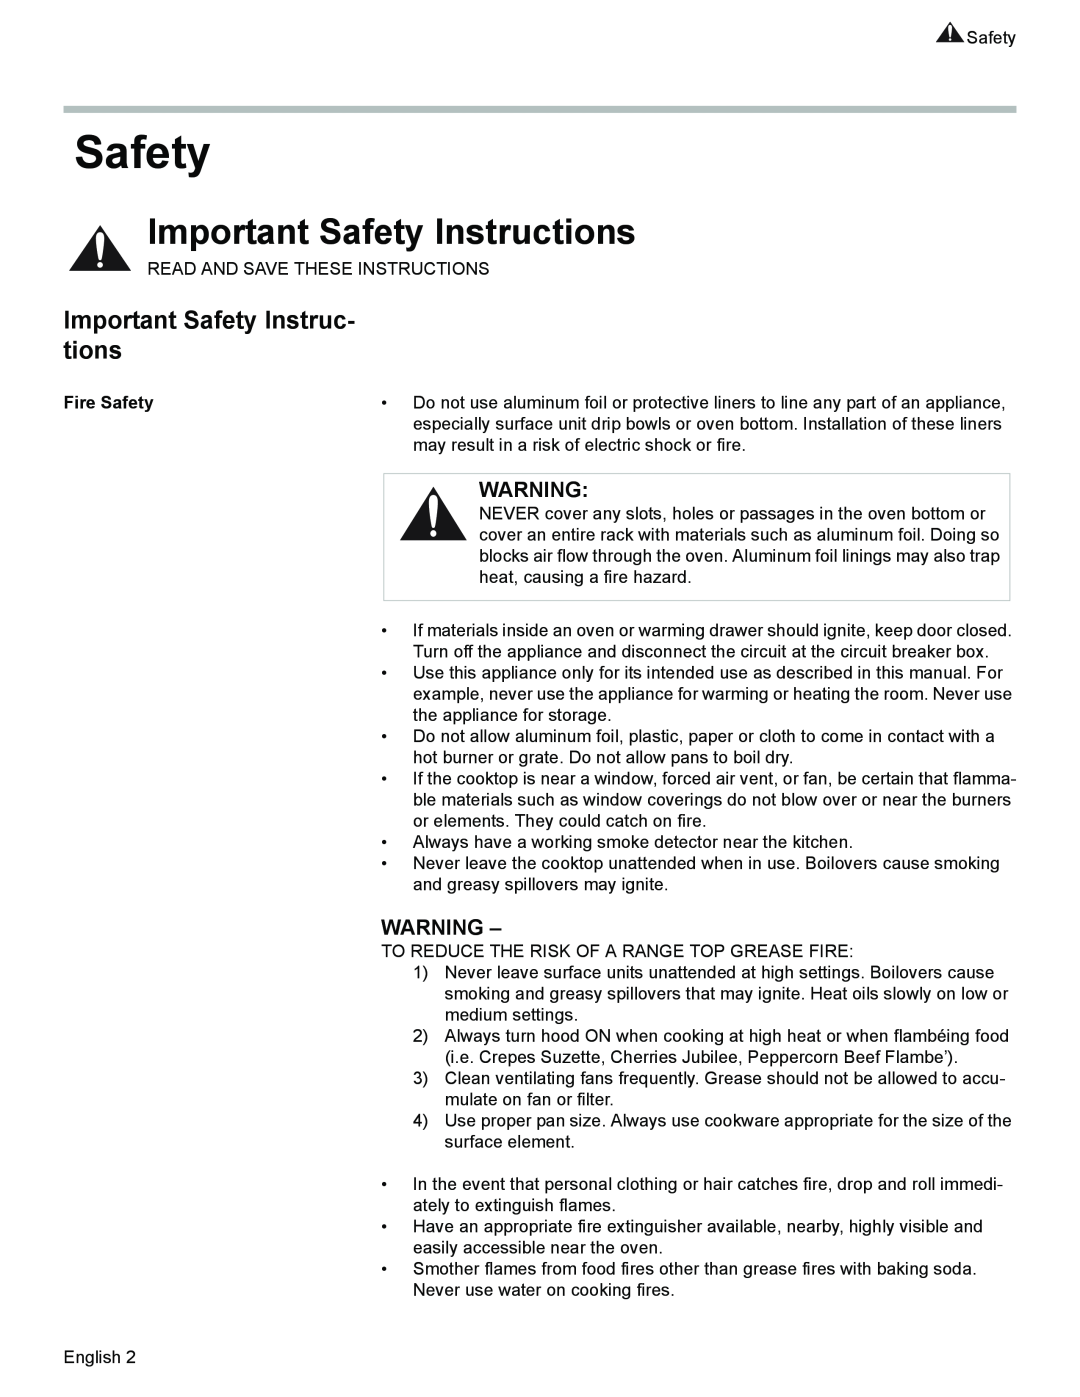 Siemens HE2425 manual Important Safety Instructions, Important Safety Instruc- tions, Fire Safety 